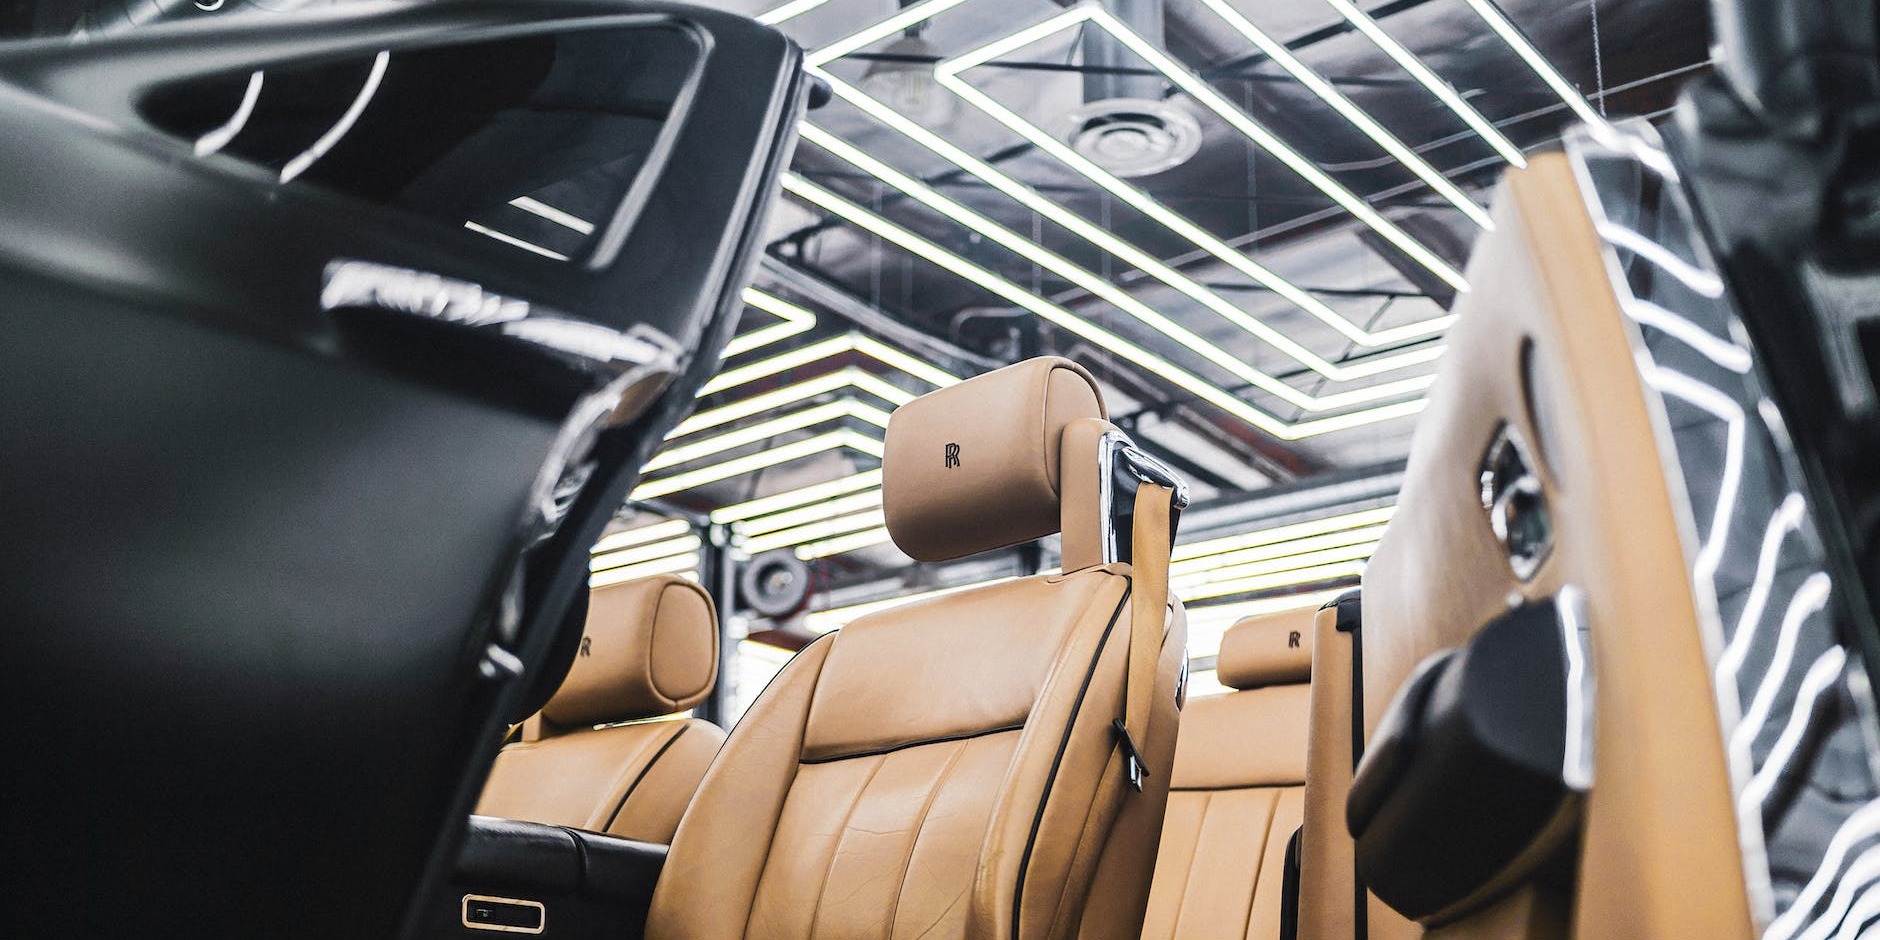 Top 5 Instagrammable Rolls Royce Prom Cars in the UK